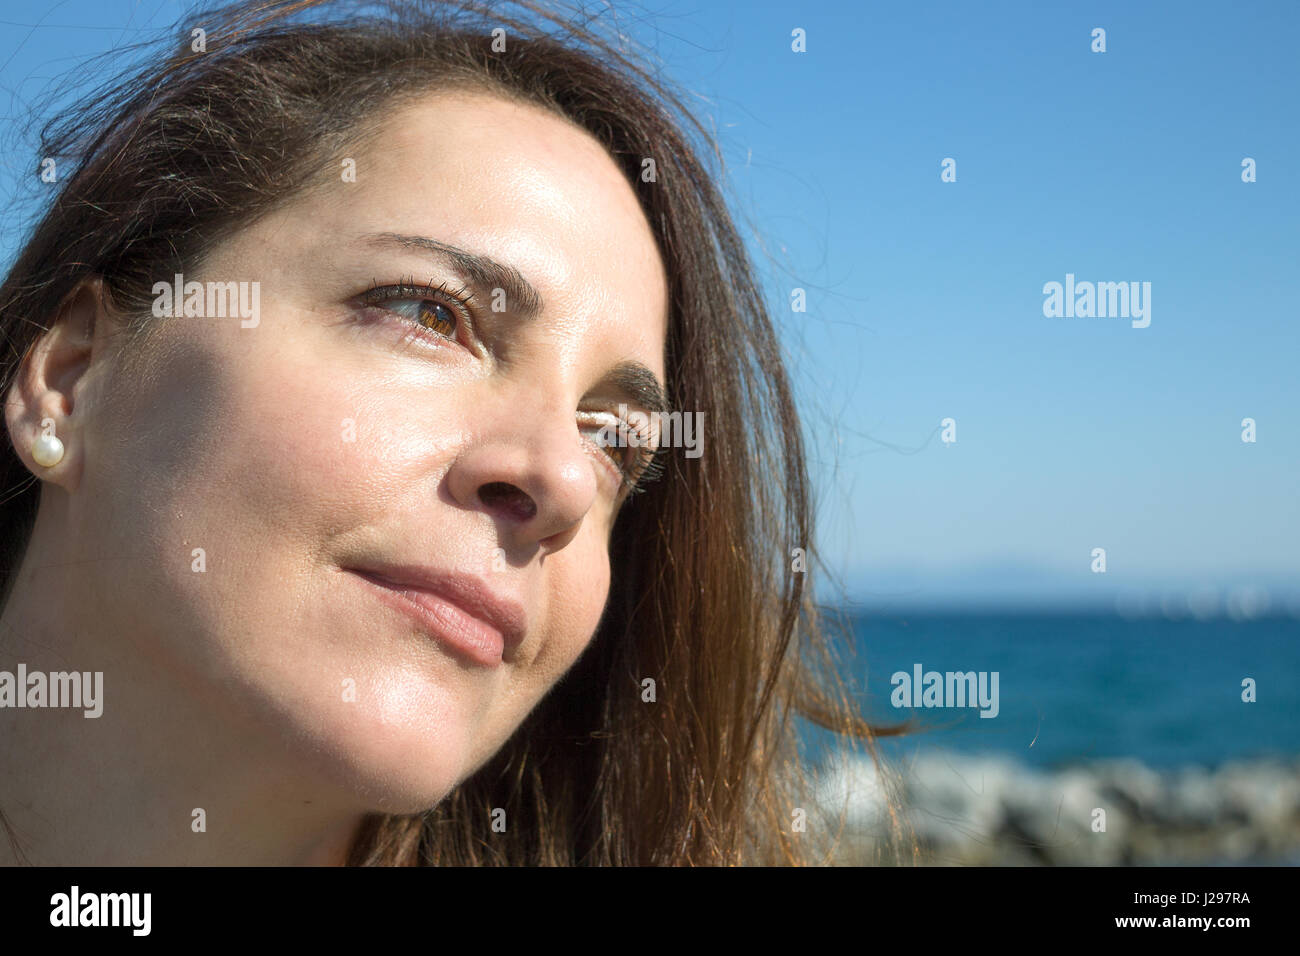 Portrait of a woman 45 years old, looking away, thinking, brown eyes, beach background. Stock Photo